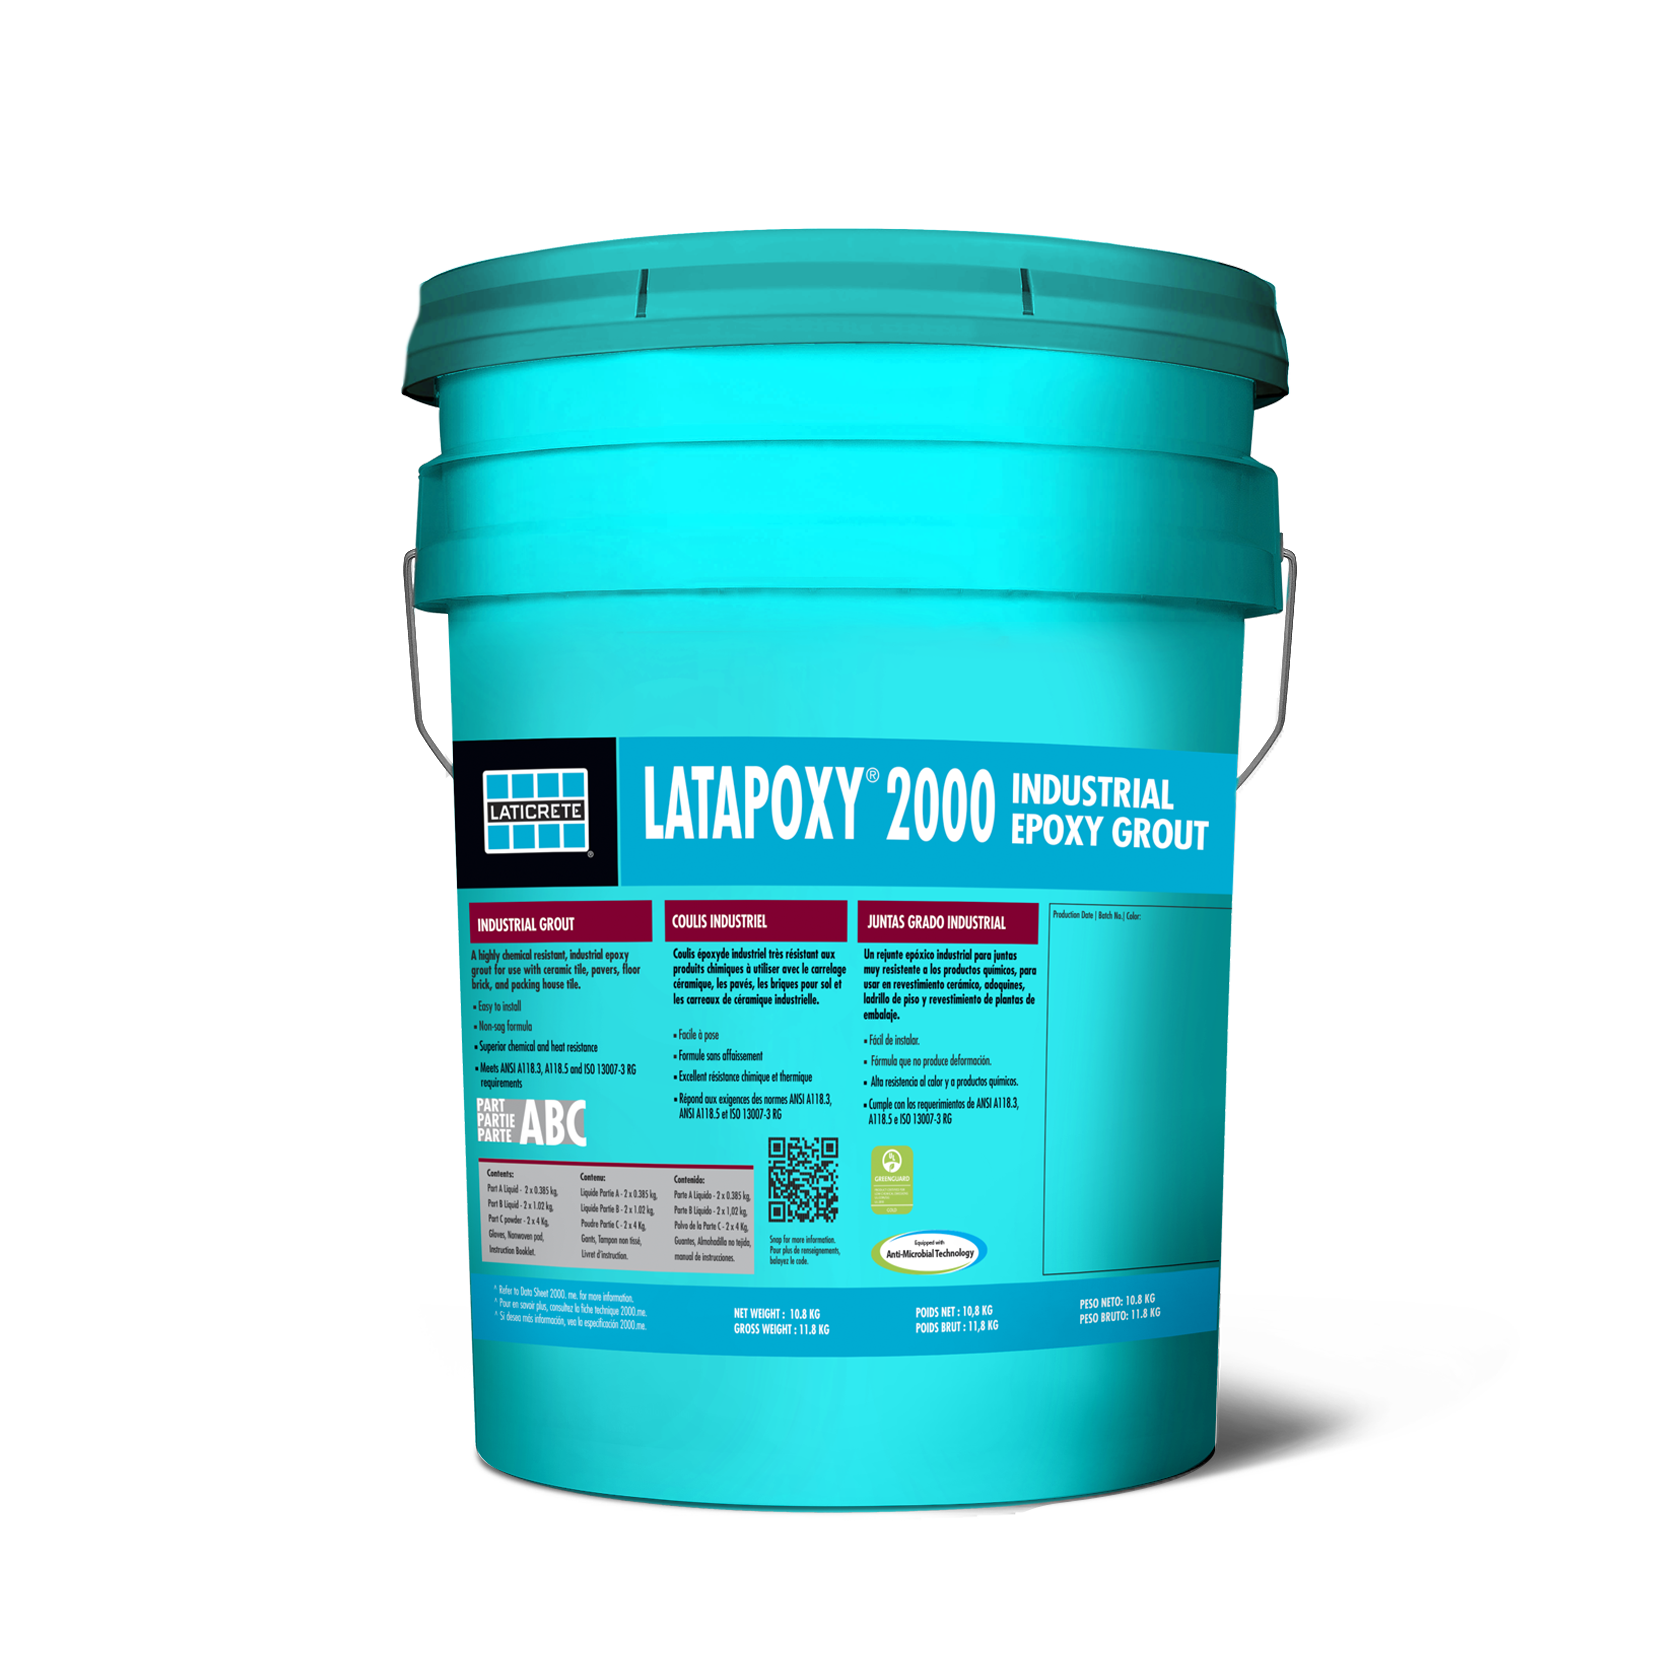 LATAPOXY® 2000 INDUSTRIAL EPOXY GROUT